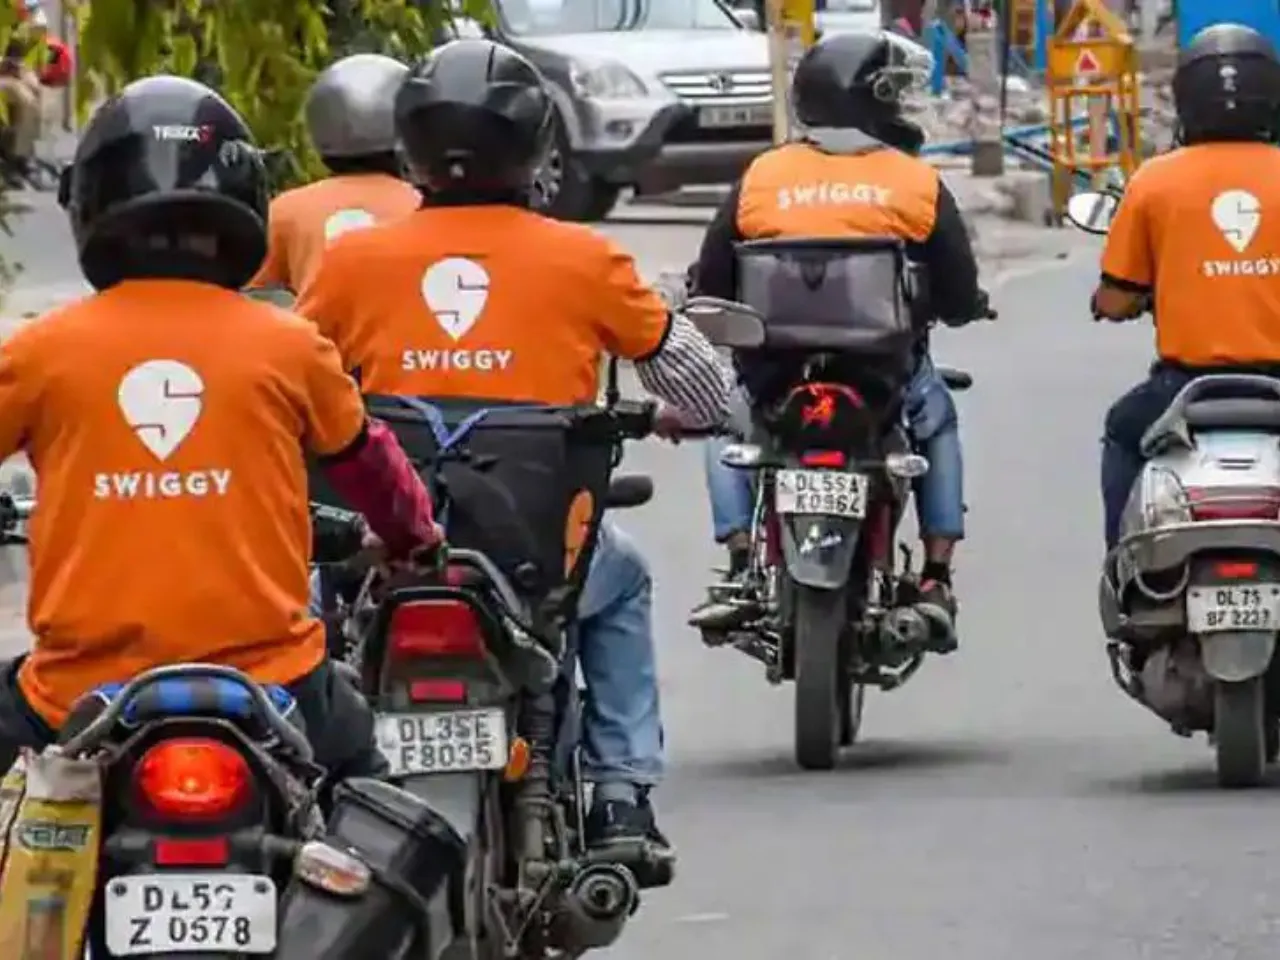 Swiggy integrates Swiggy Mall with Instamart for diverse offerings